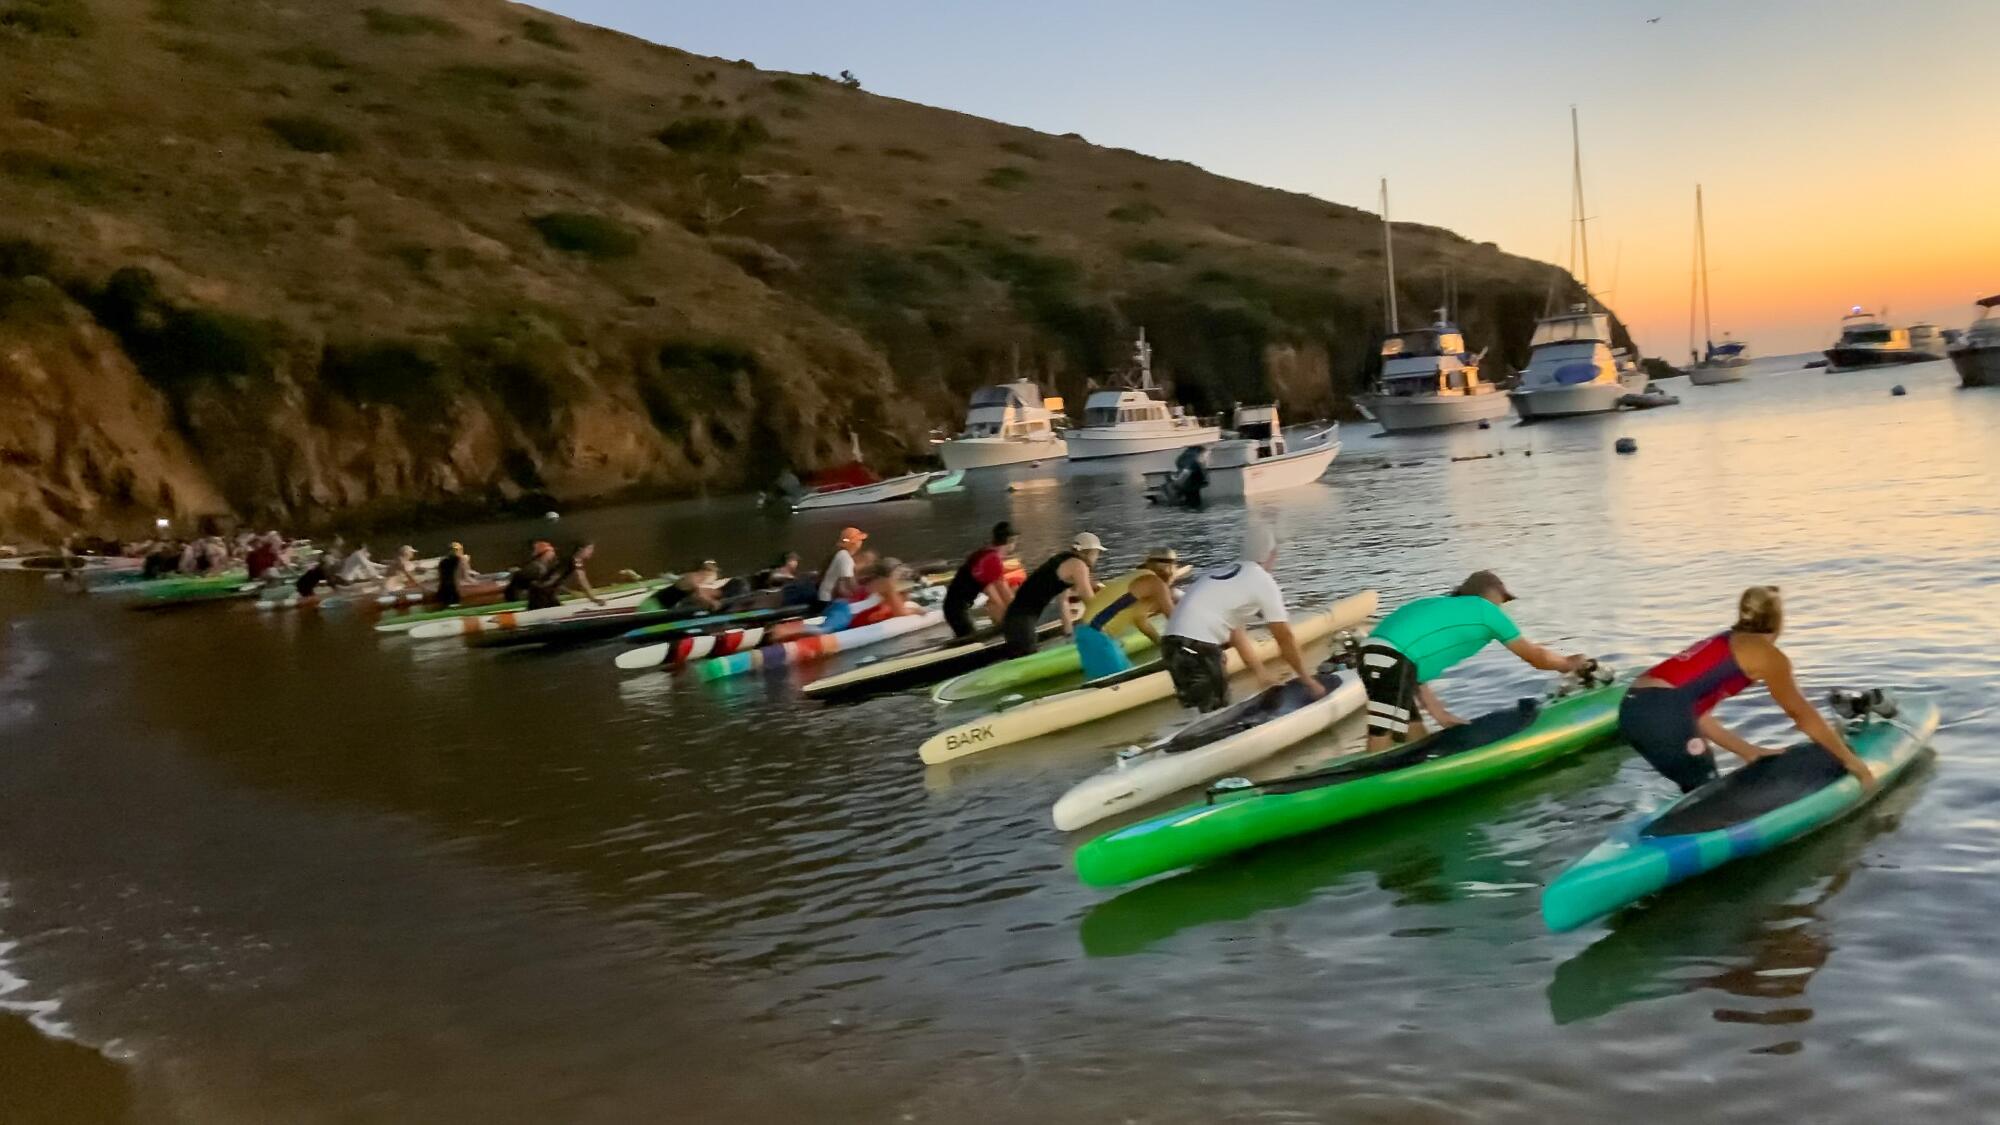 Racers take to the water for the start of the 2023 Catalina Classic.